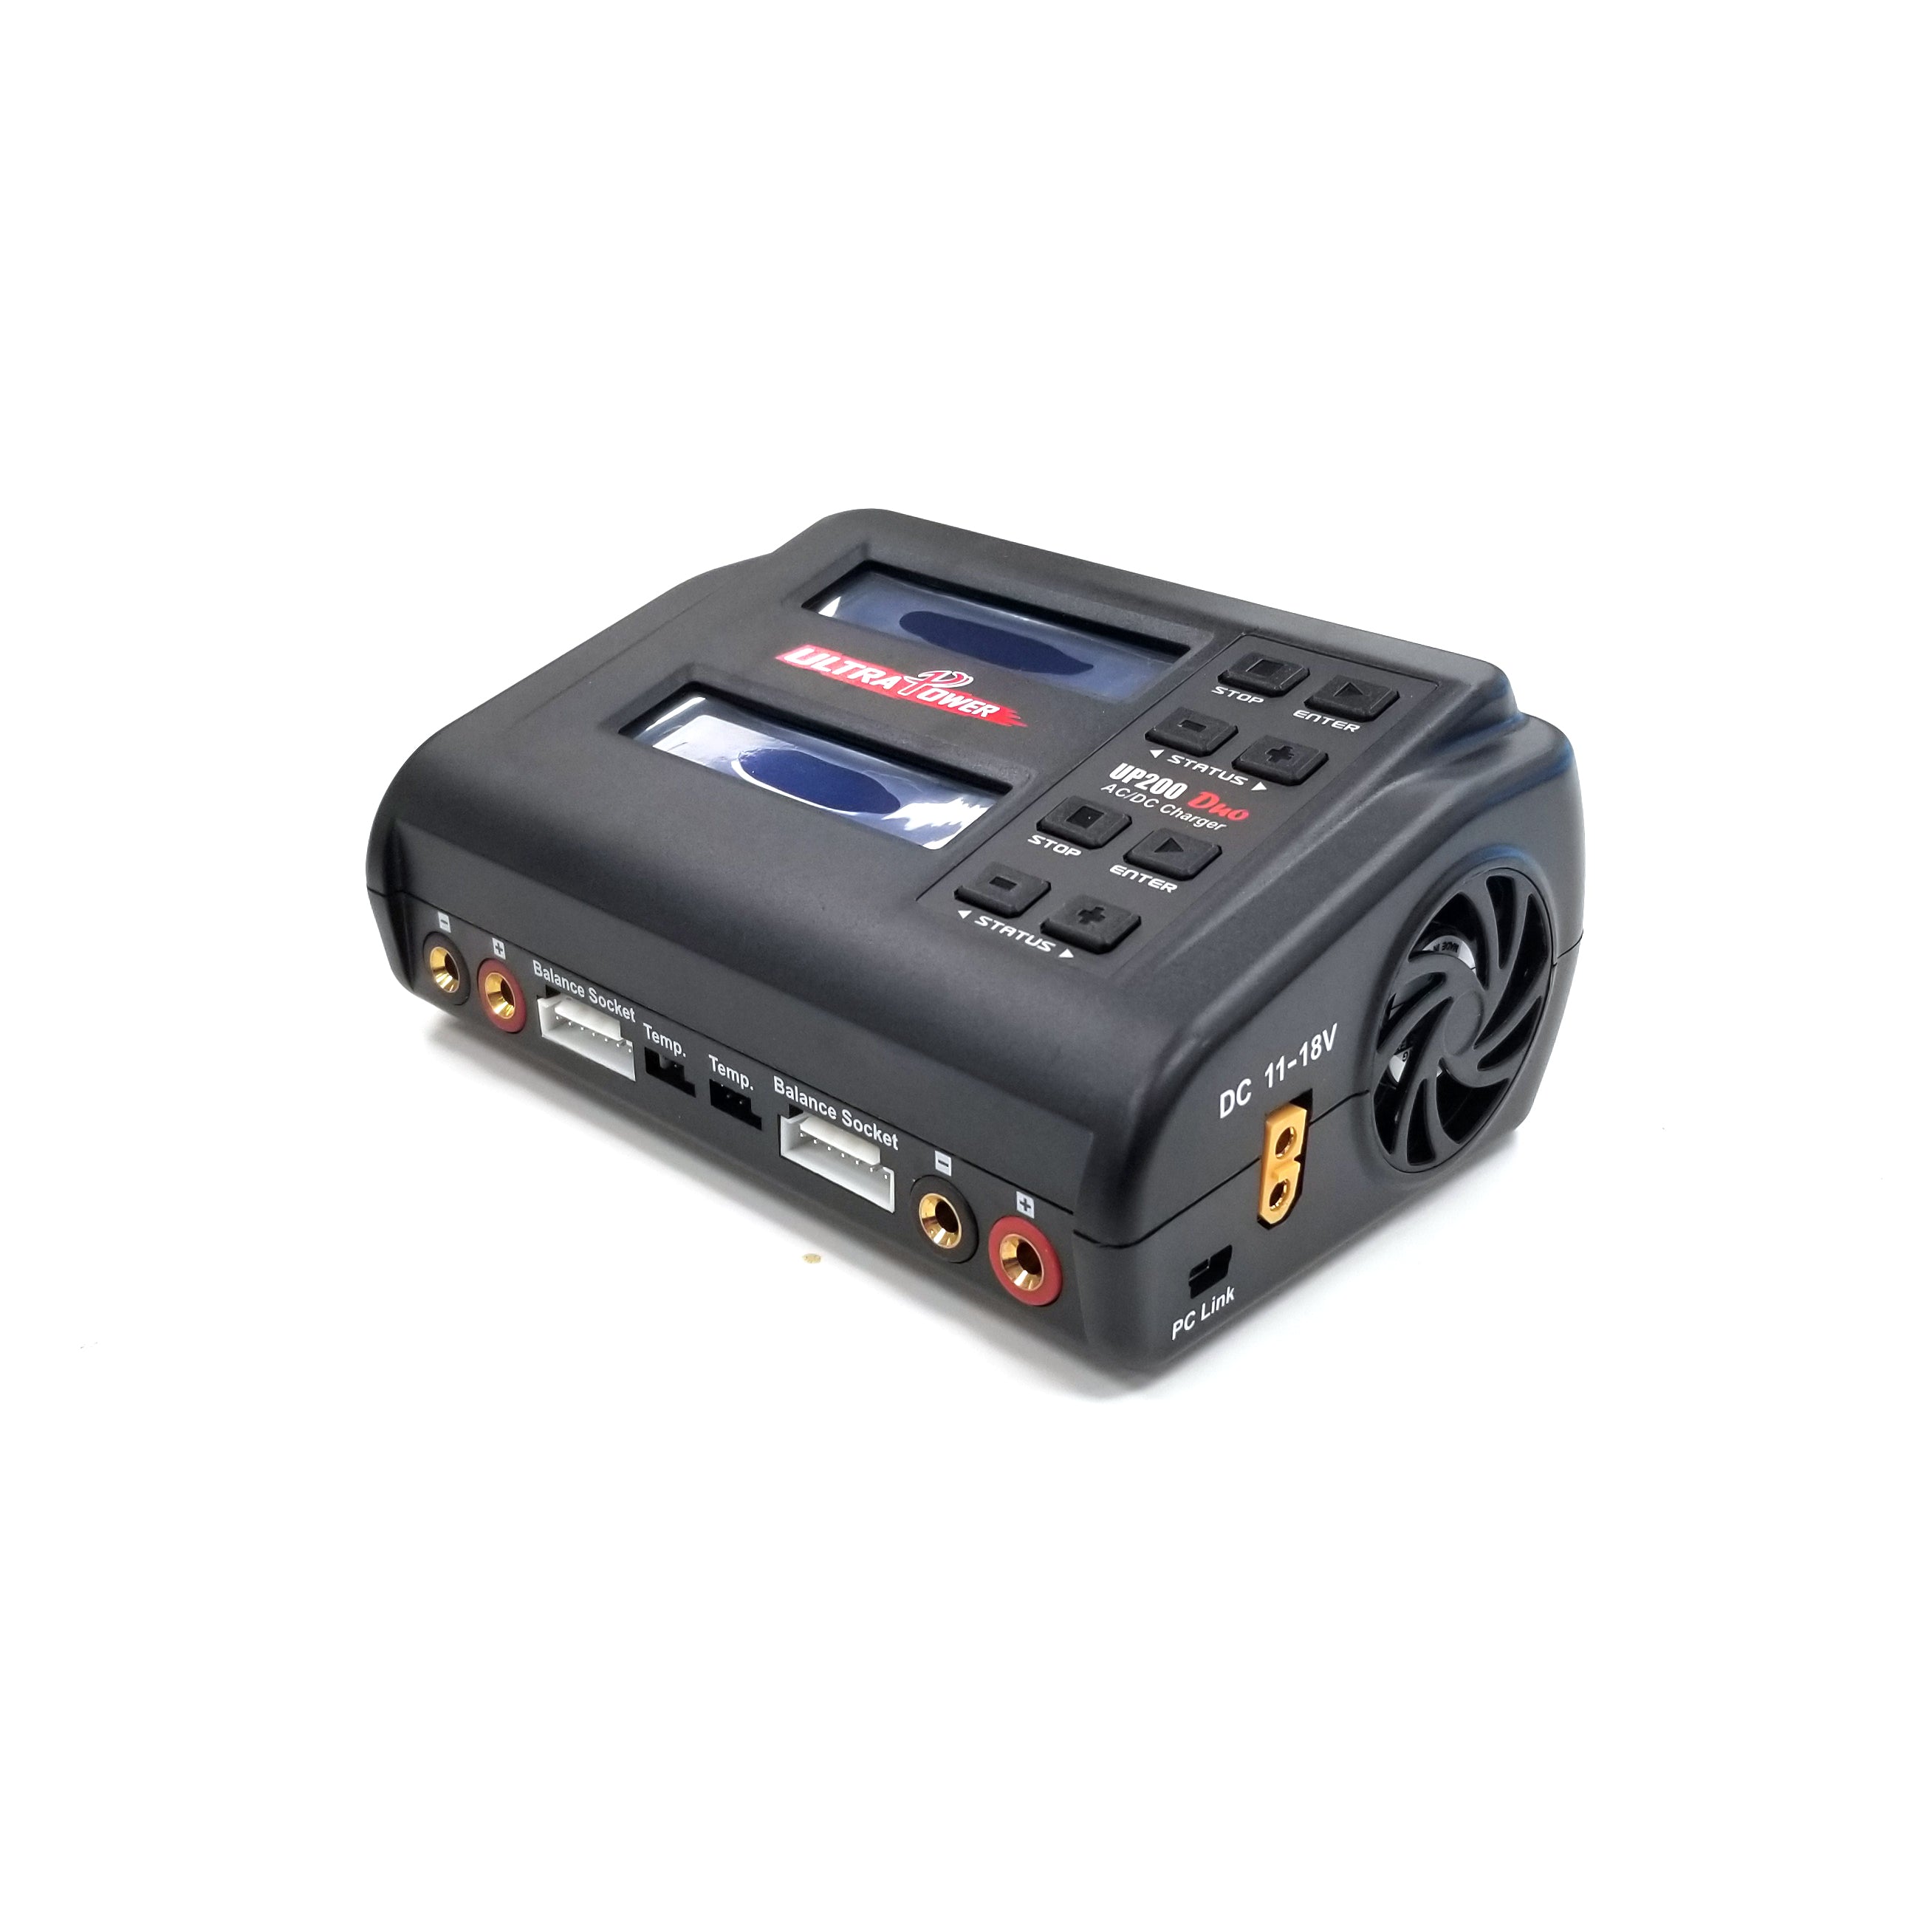 Ultra Power UP200 DUO 200W Dual Port Multi-Chemistry AC/DC Charger